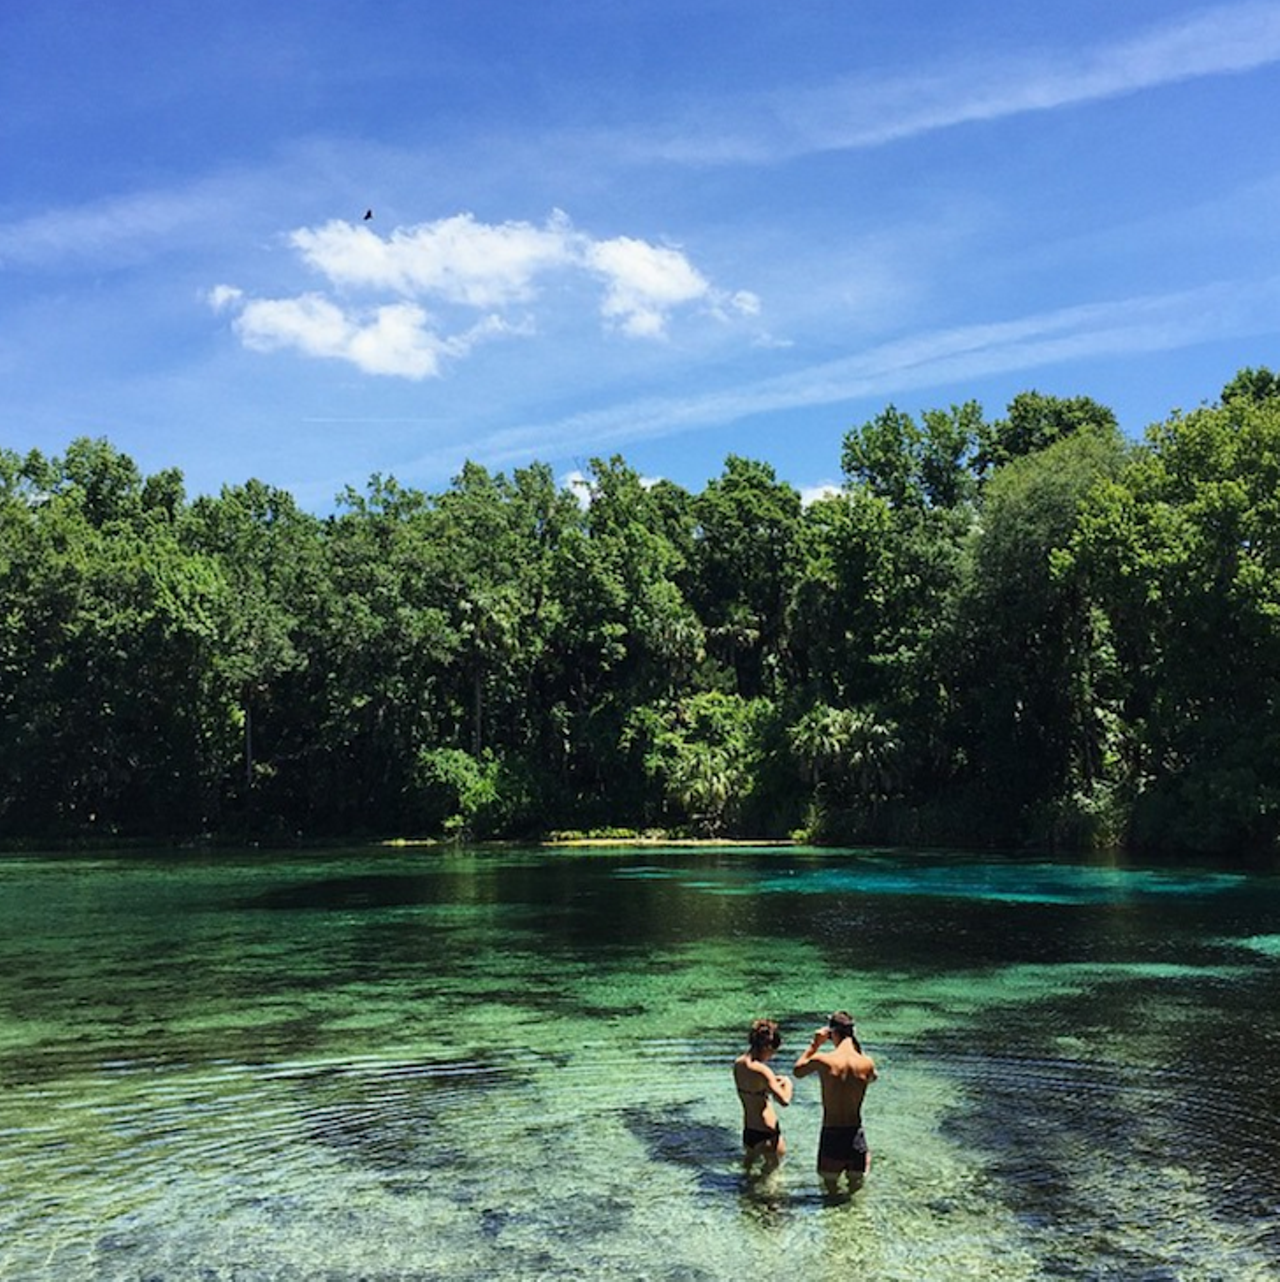 Alexander Springs Recreation area
Estimated driving distance from Orlando: 1 hour 10 min.
Located in the Ocala National forest, these springs are surrounded by forest animals and a ton of activities including snorkeling, swimming, canoeing and more. Camping is first come, first serve for $22 a night. 
Photo via ayce09/Instagram